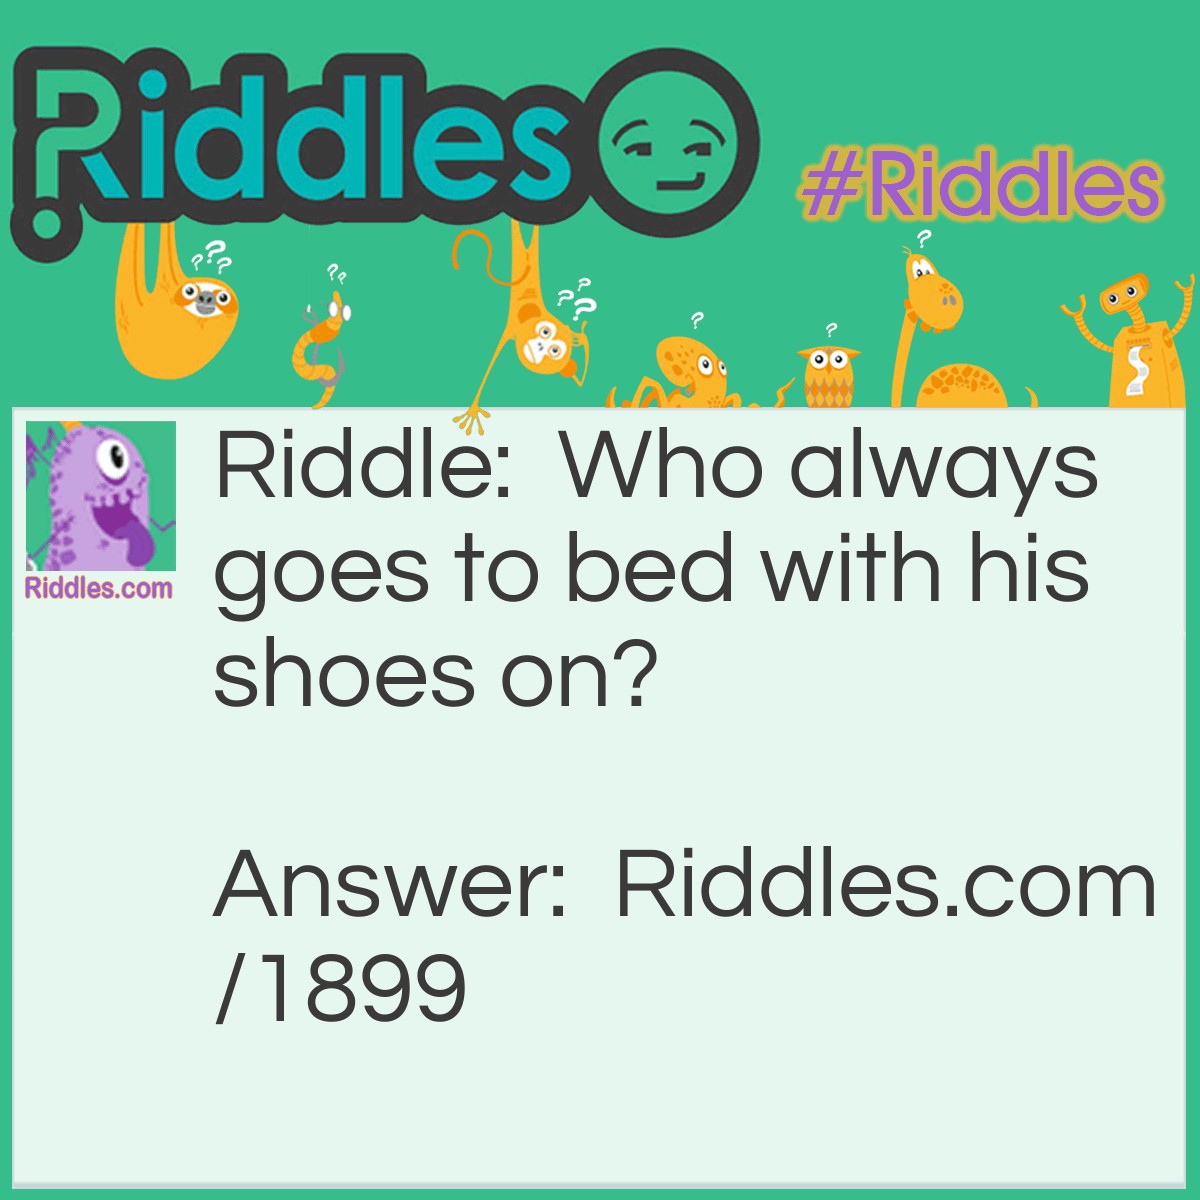 Riddle: Who always goes to bed with his shoes on? Answer: A horse.